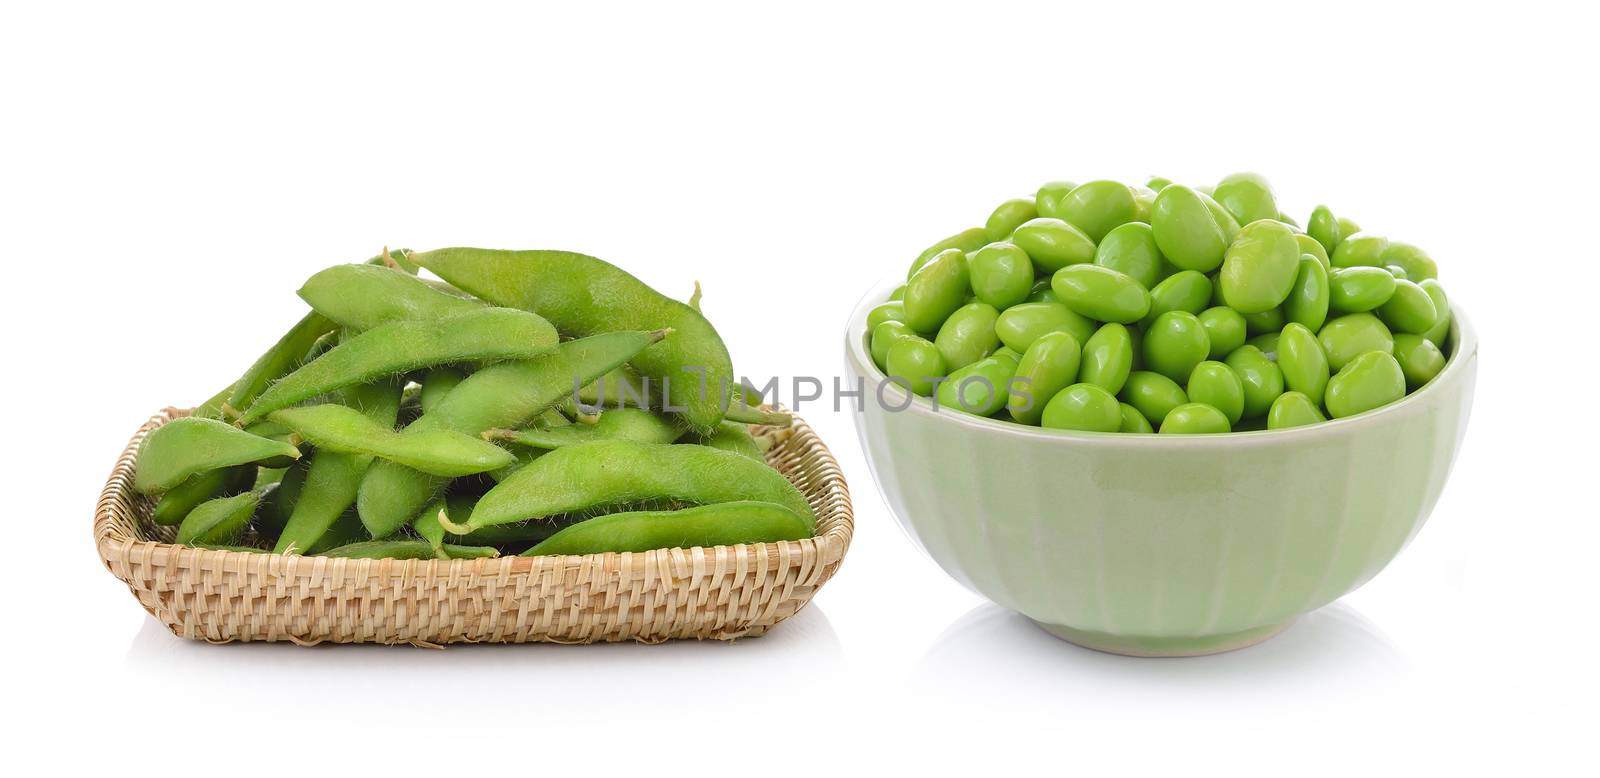  soybeans on white background